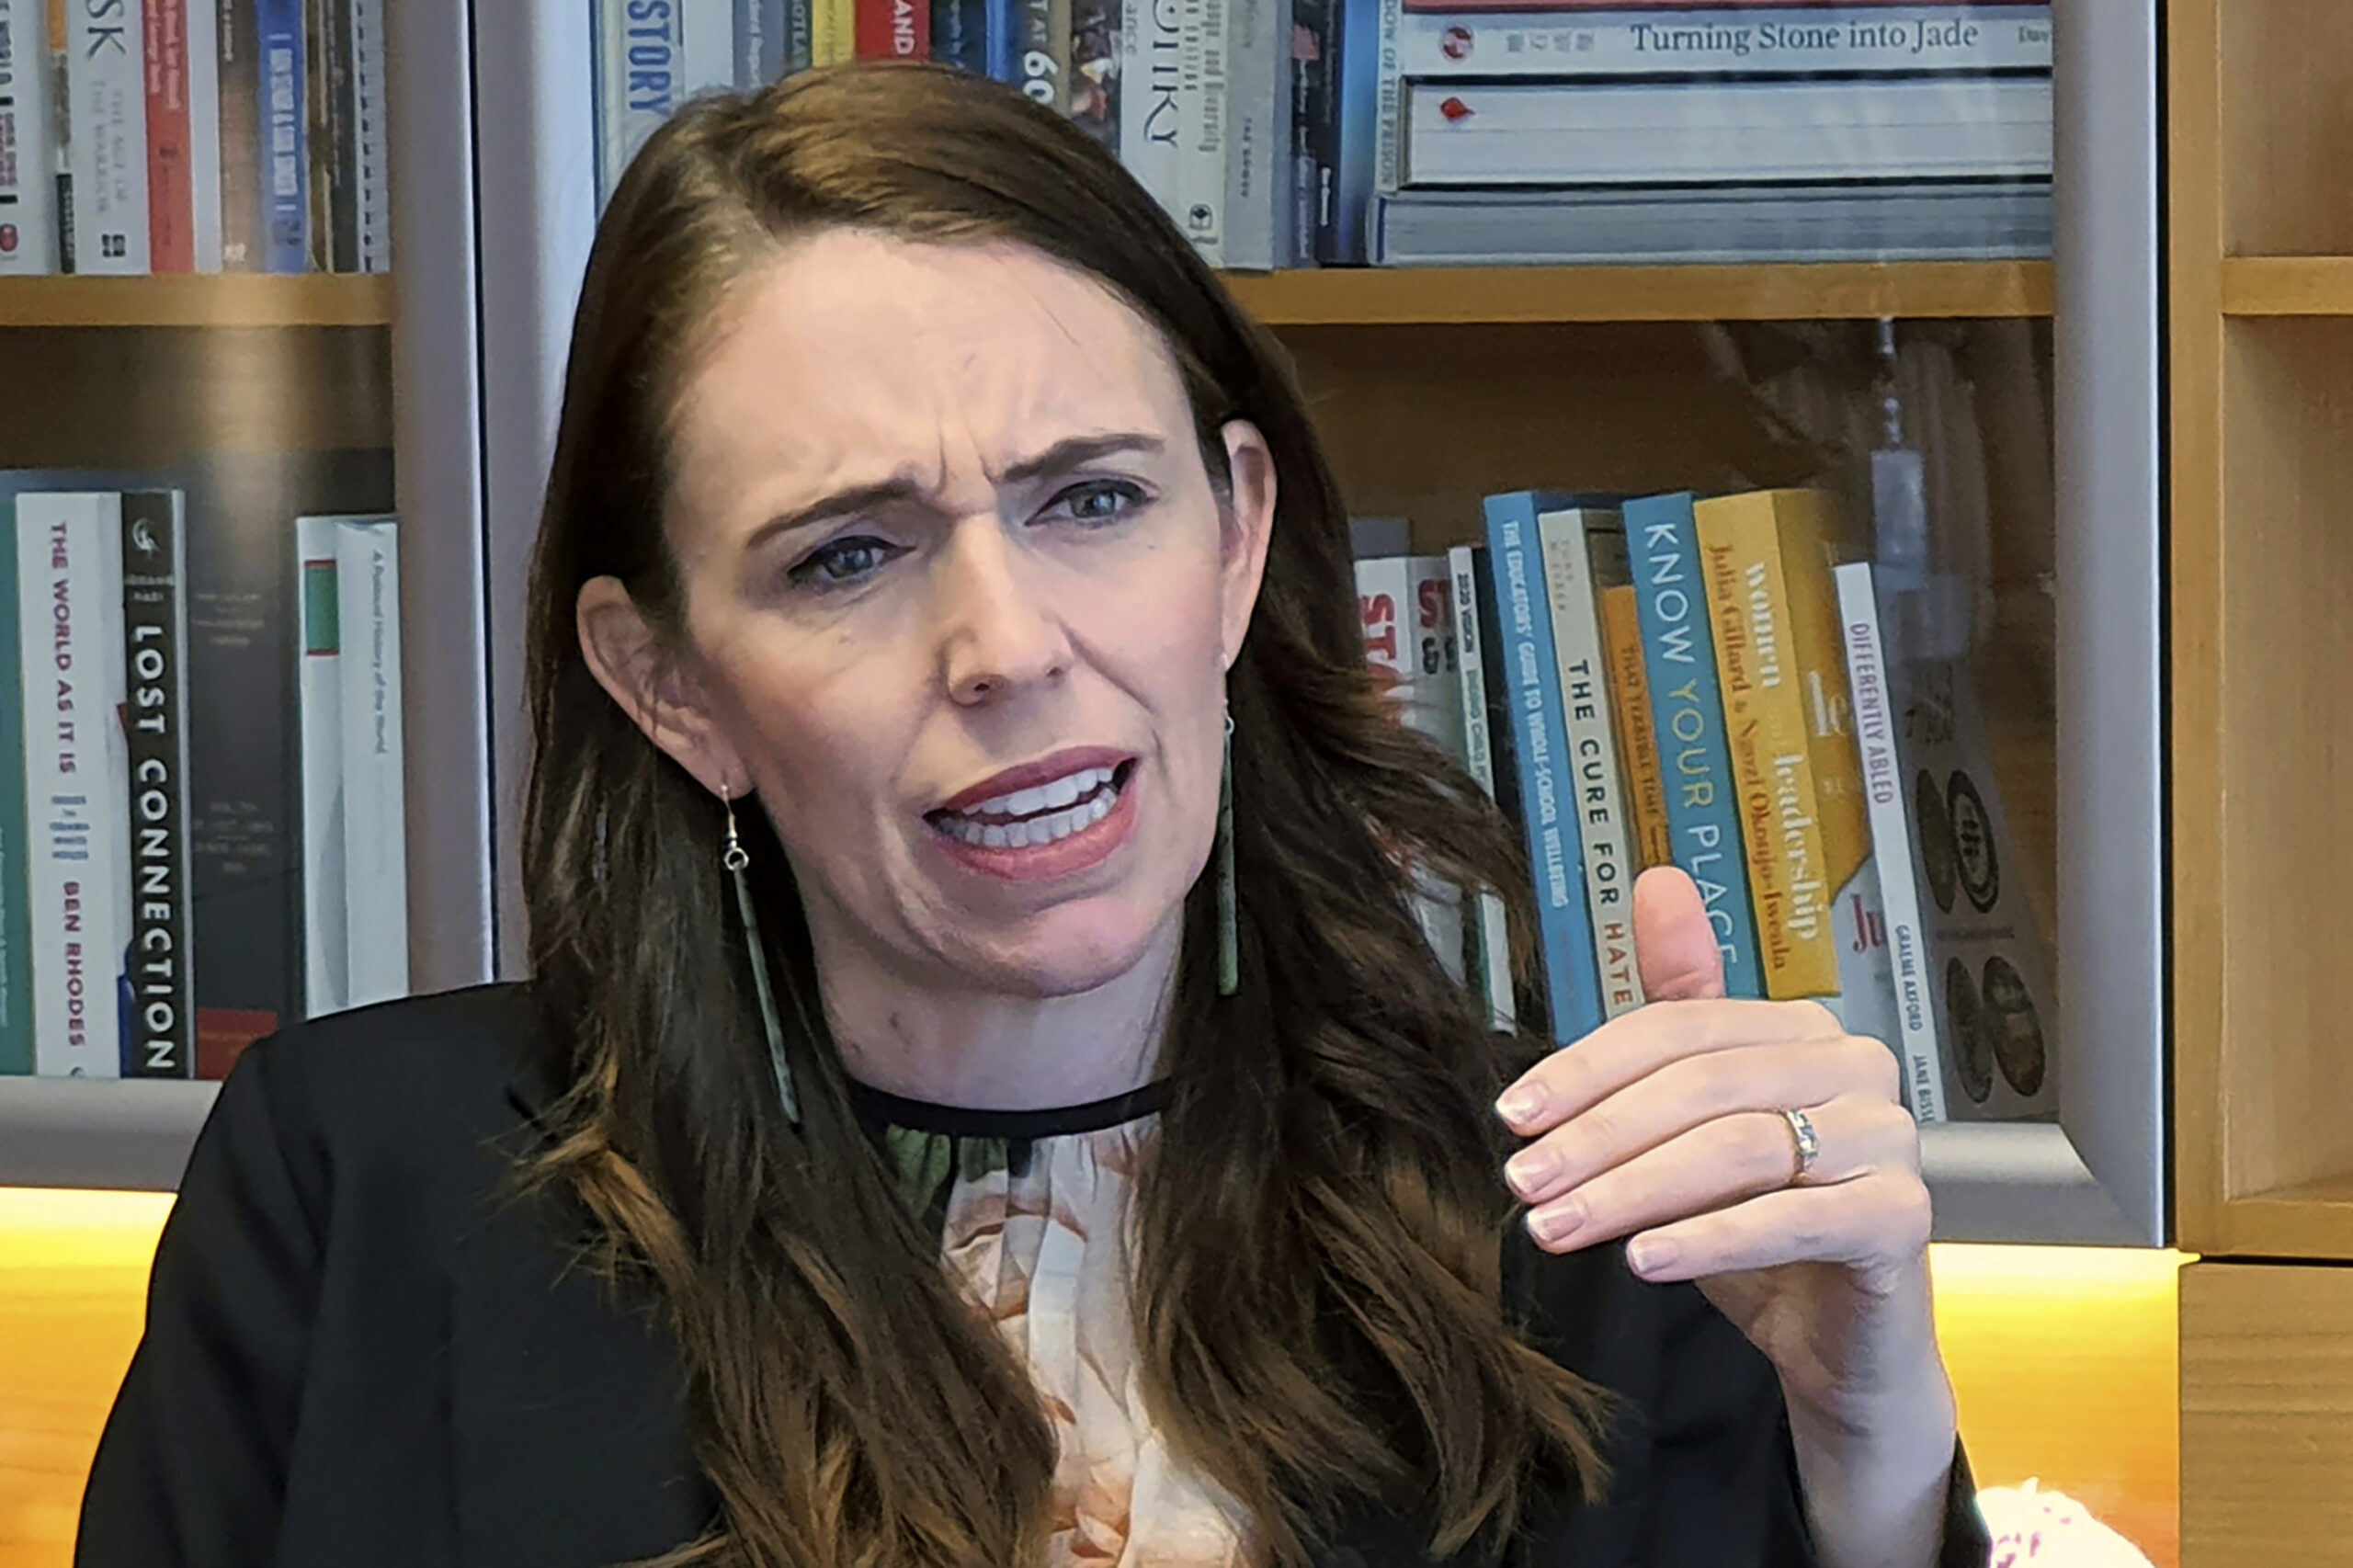 FILE - In this Dec. 16, 2020, file photo, New Zealand's Prime Minister Jacinda Ardern speaks during an interviewed in her office at the parliament in Wellington, New Zealand. Tentative plans for a movie that recounts the response of Ardern to a gunman's slaughter of Muslim worshippers drew criticism in New Zealand on Friday, June 11, 2021 for not focusing on the victims of the attacks. (AP Photo/Sam James, File)